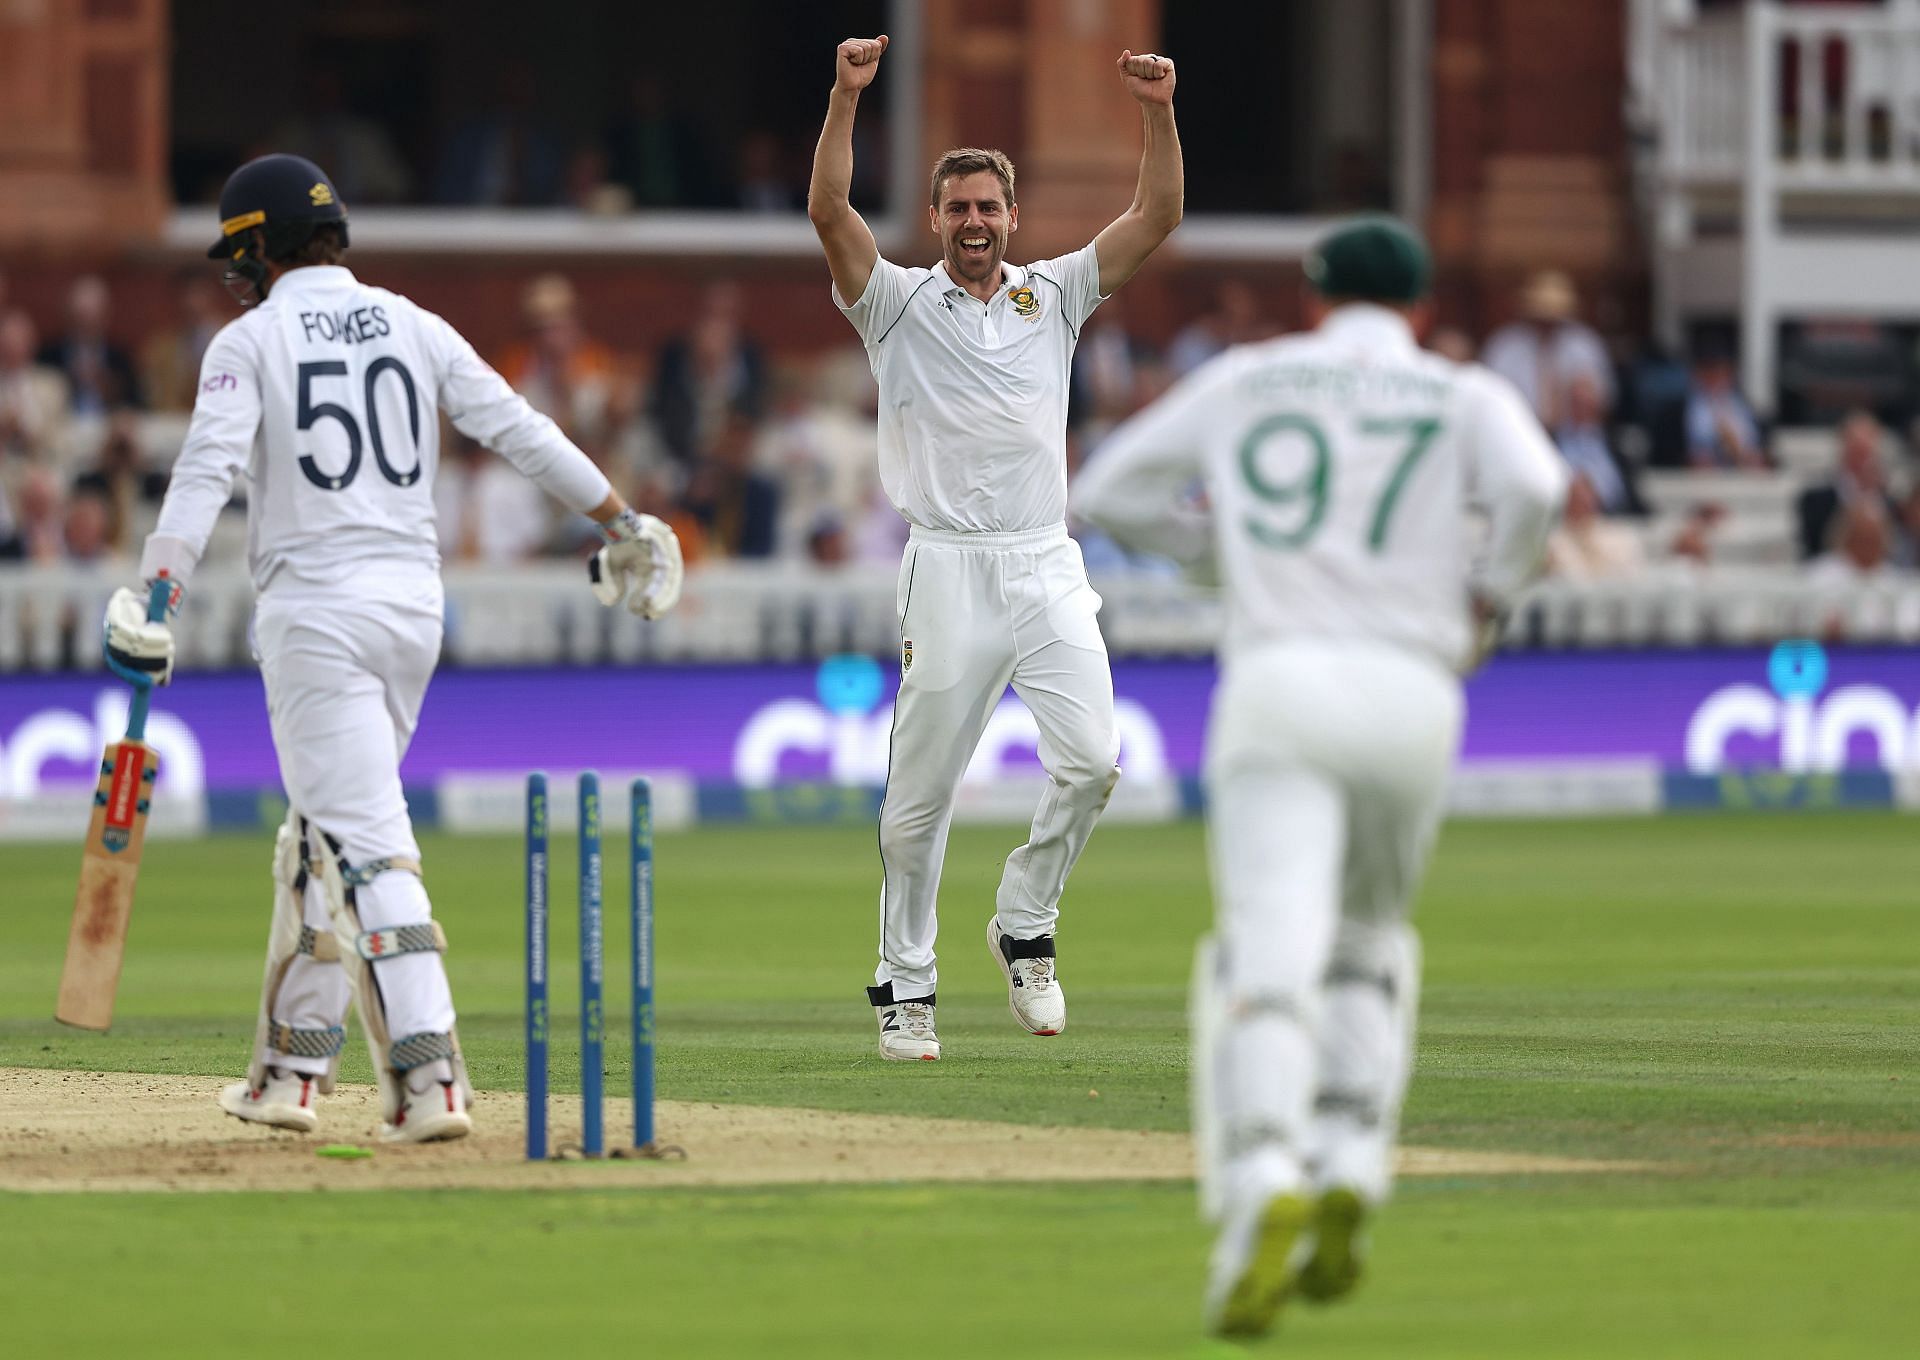 South Africa are currently playing a Test series against England